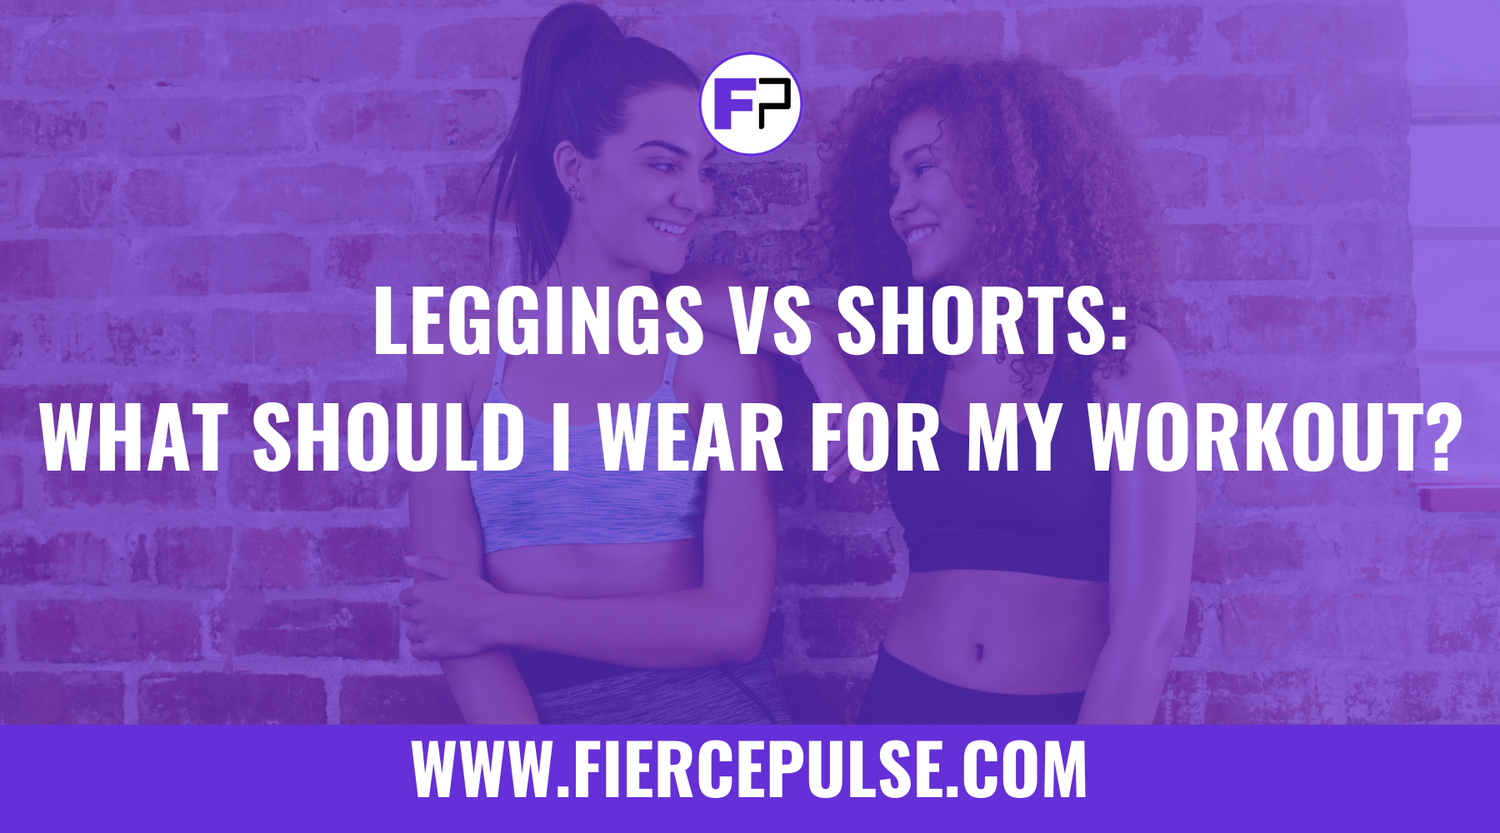 Leggings vs. Shorts: What Should I Wear for My Workout?